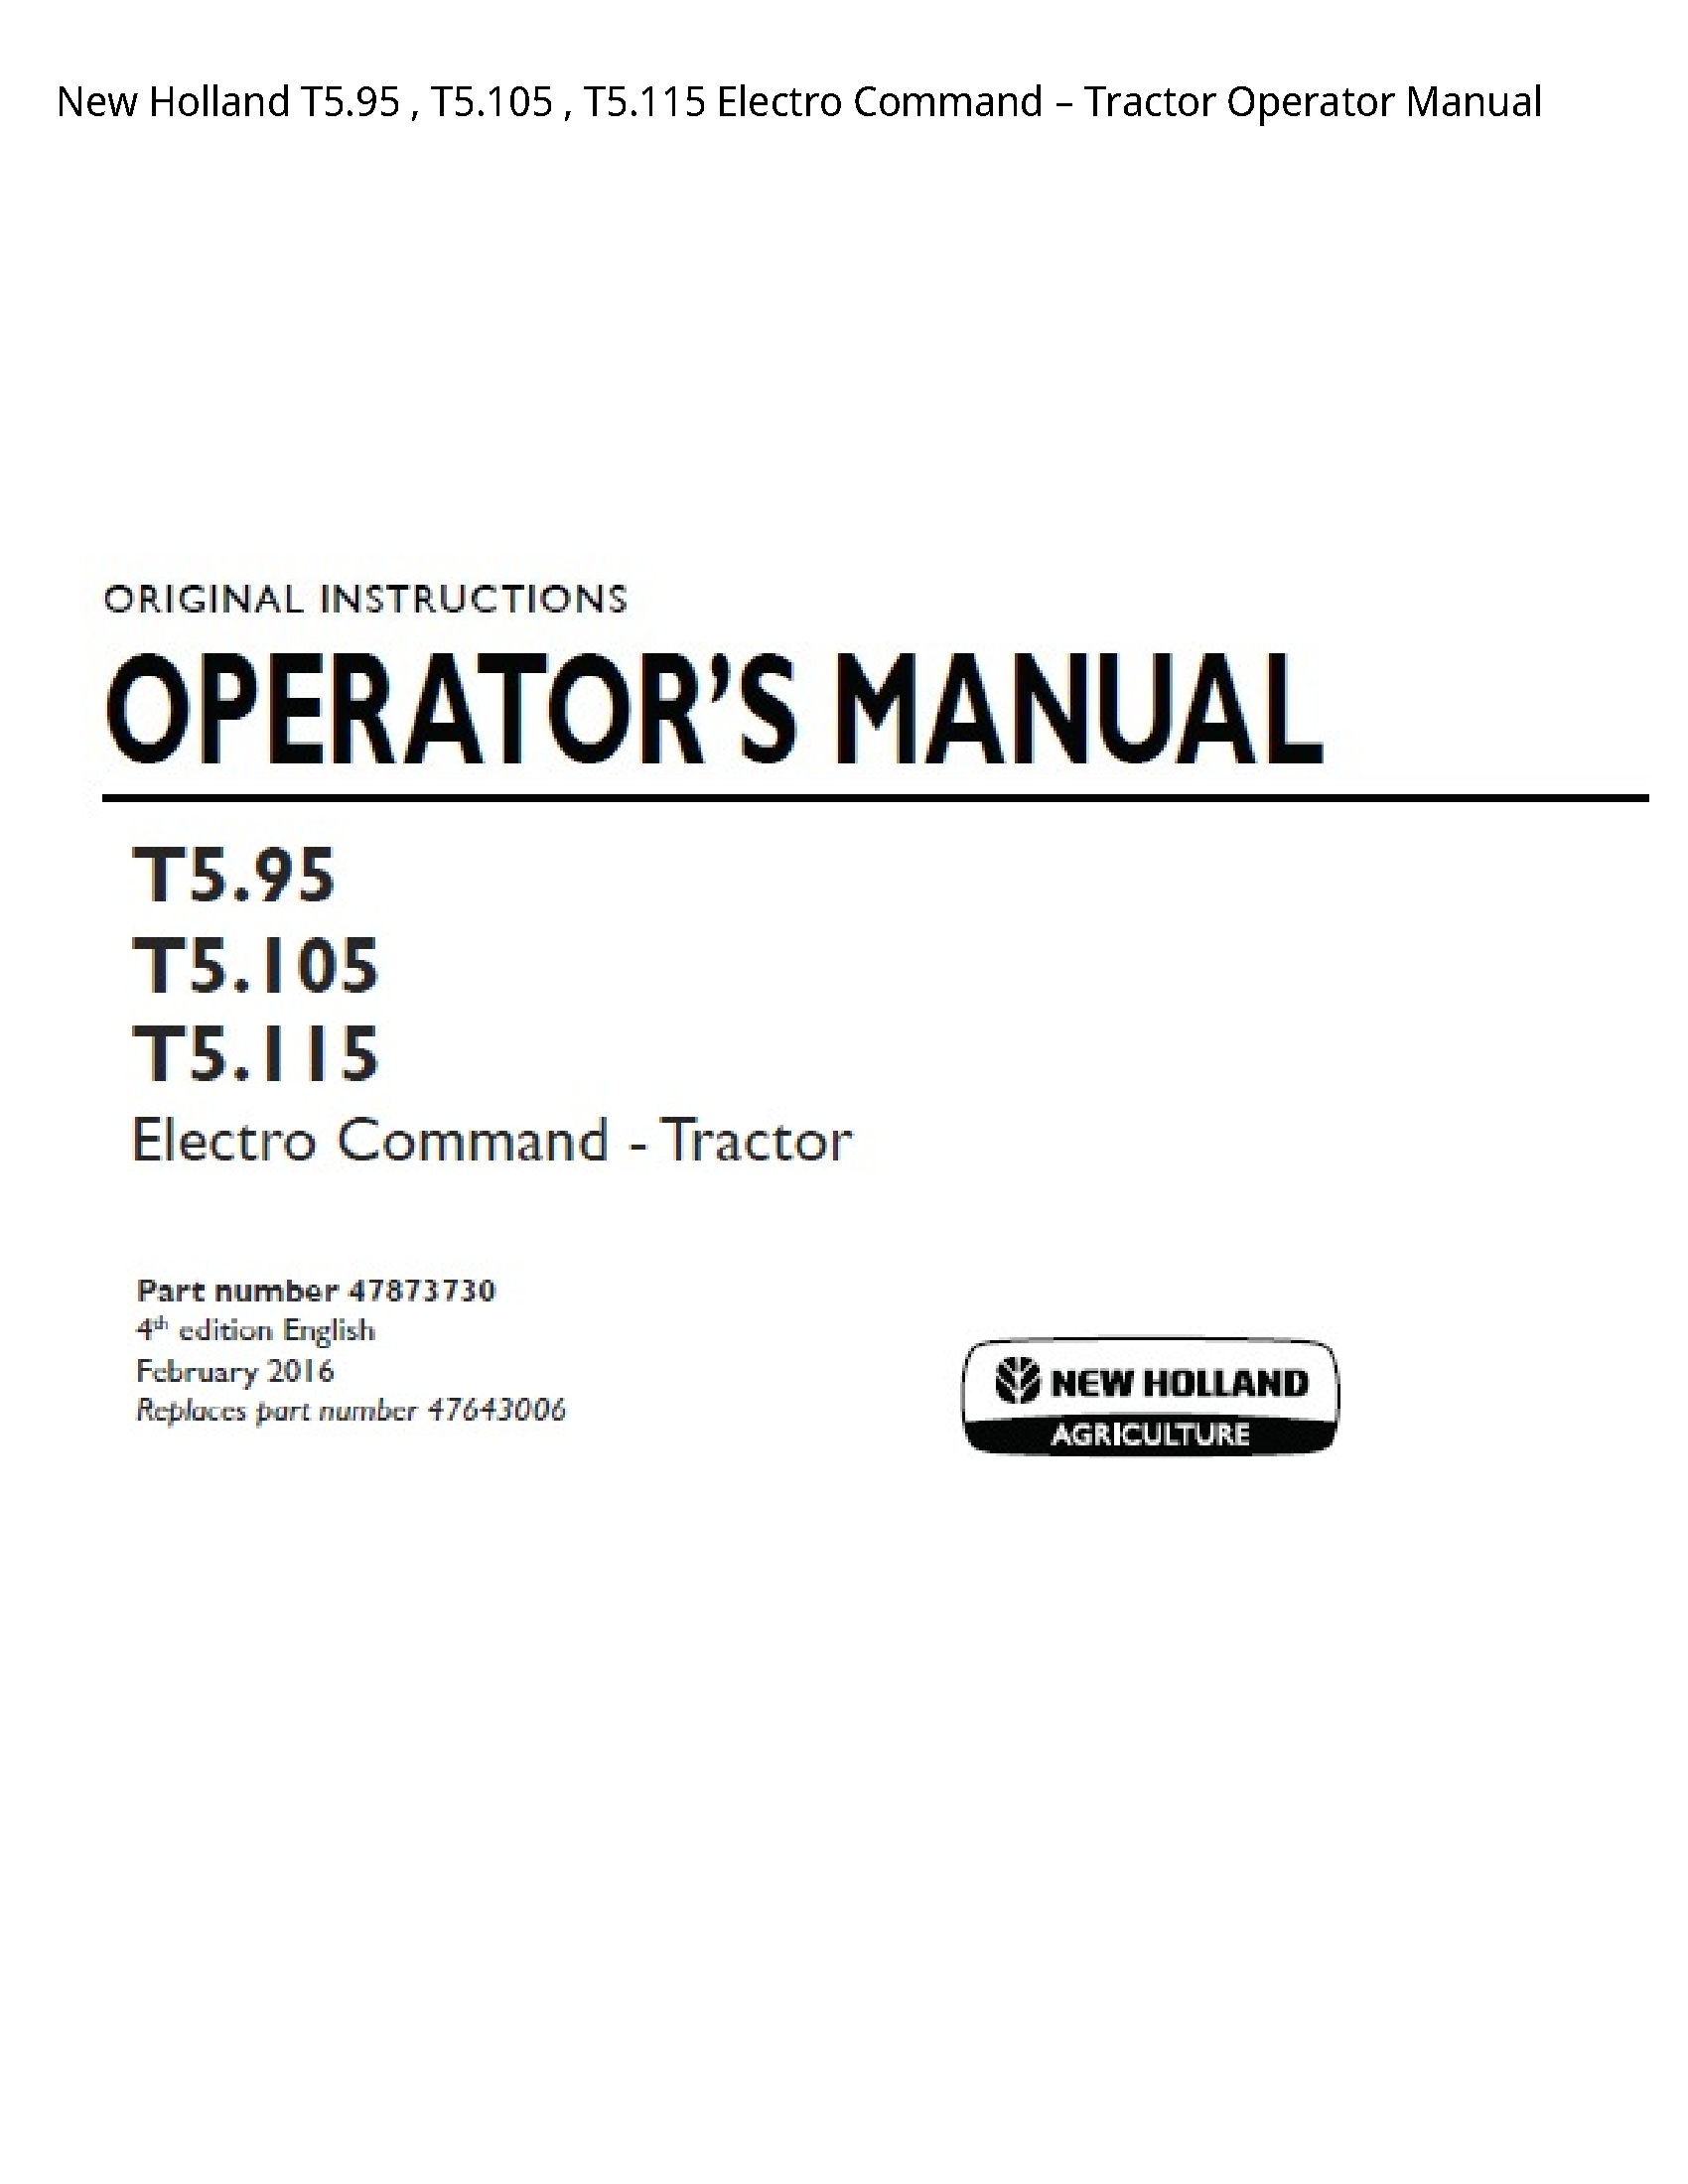 New Holland T5.95 Electro Command Tractor Operator manual